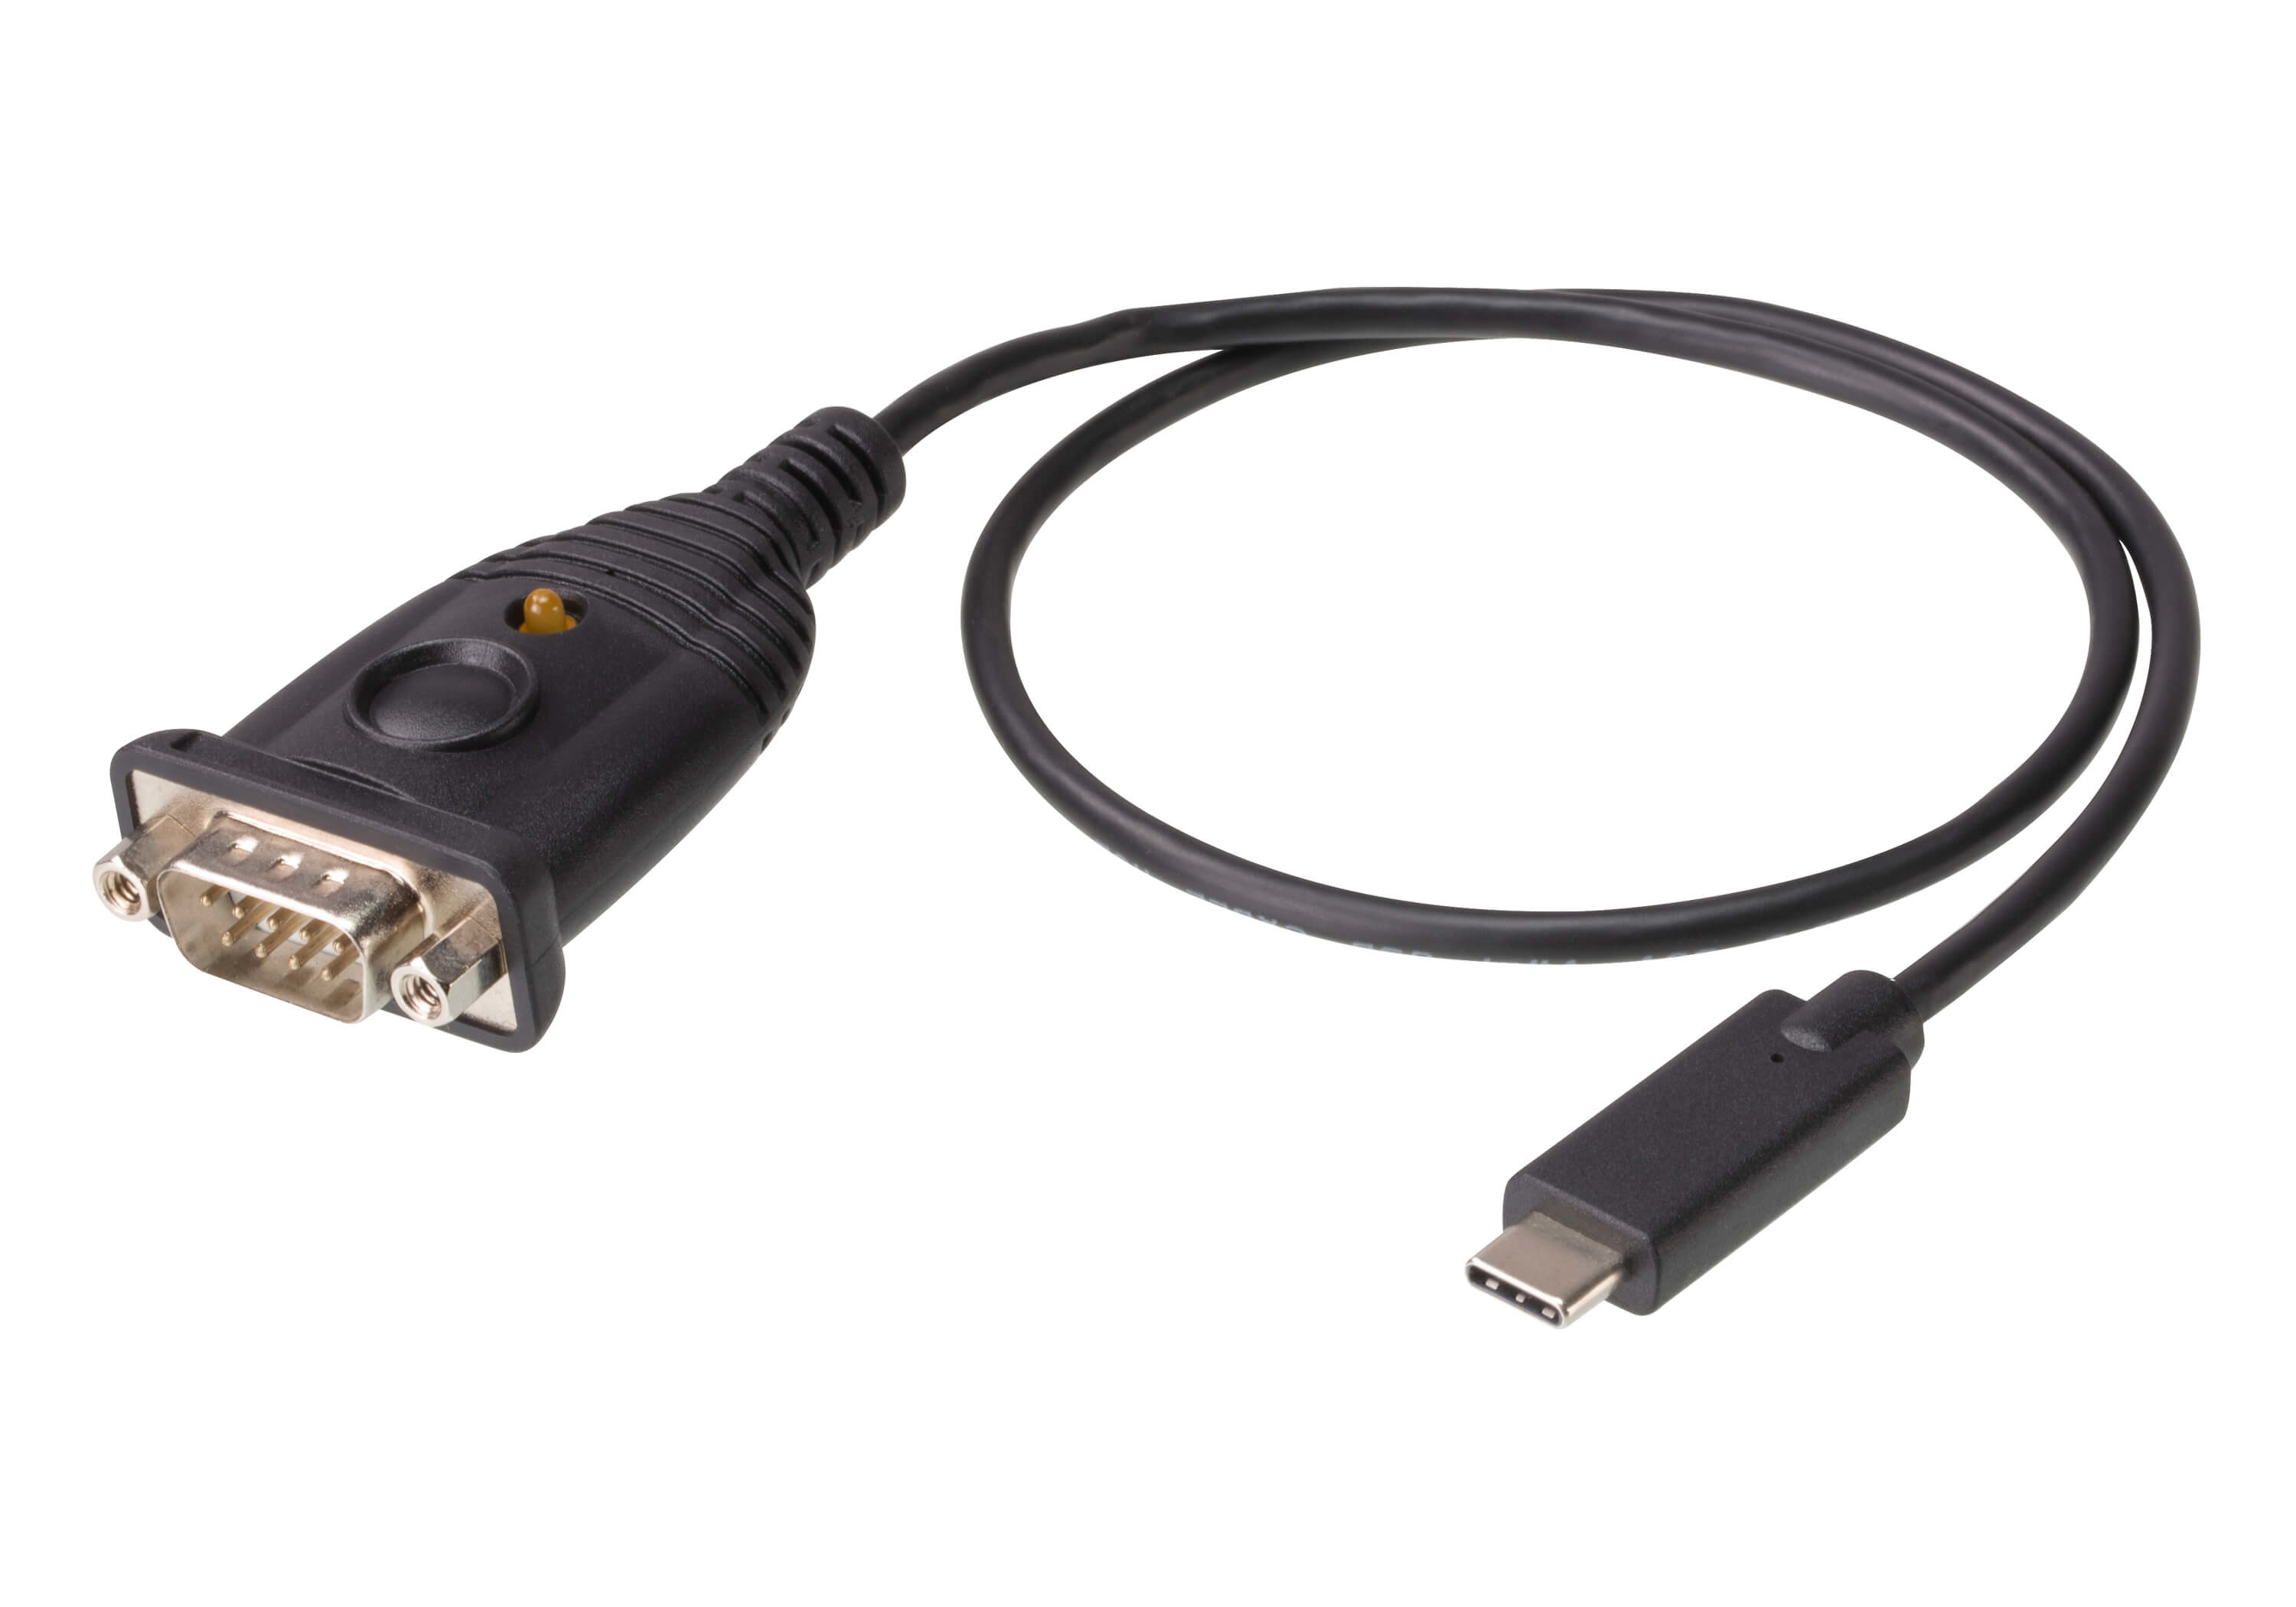 ATEN UC232C RS-232 USB Solutions Converters UC232C Search Product or keyword USB-C Sort